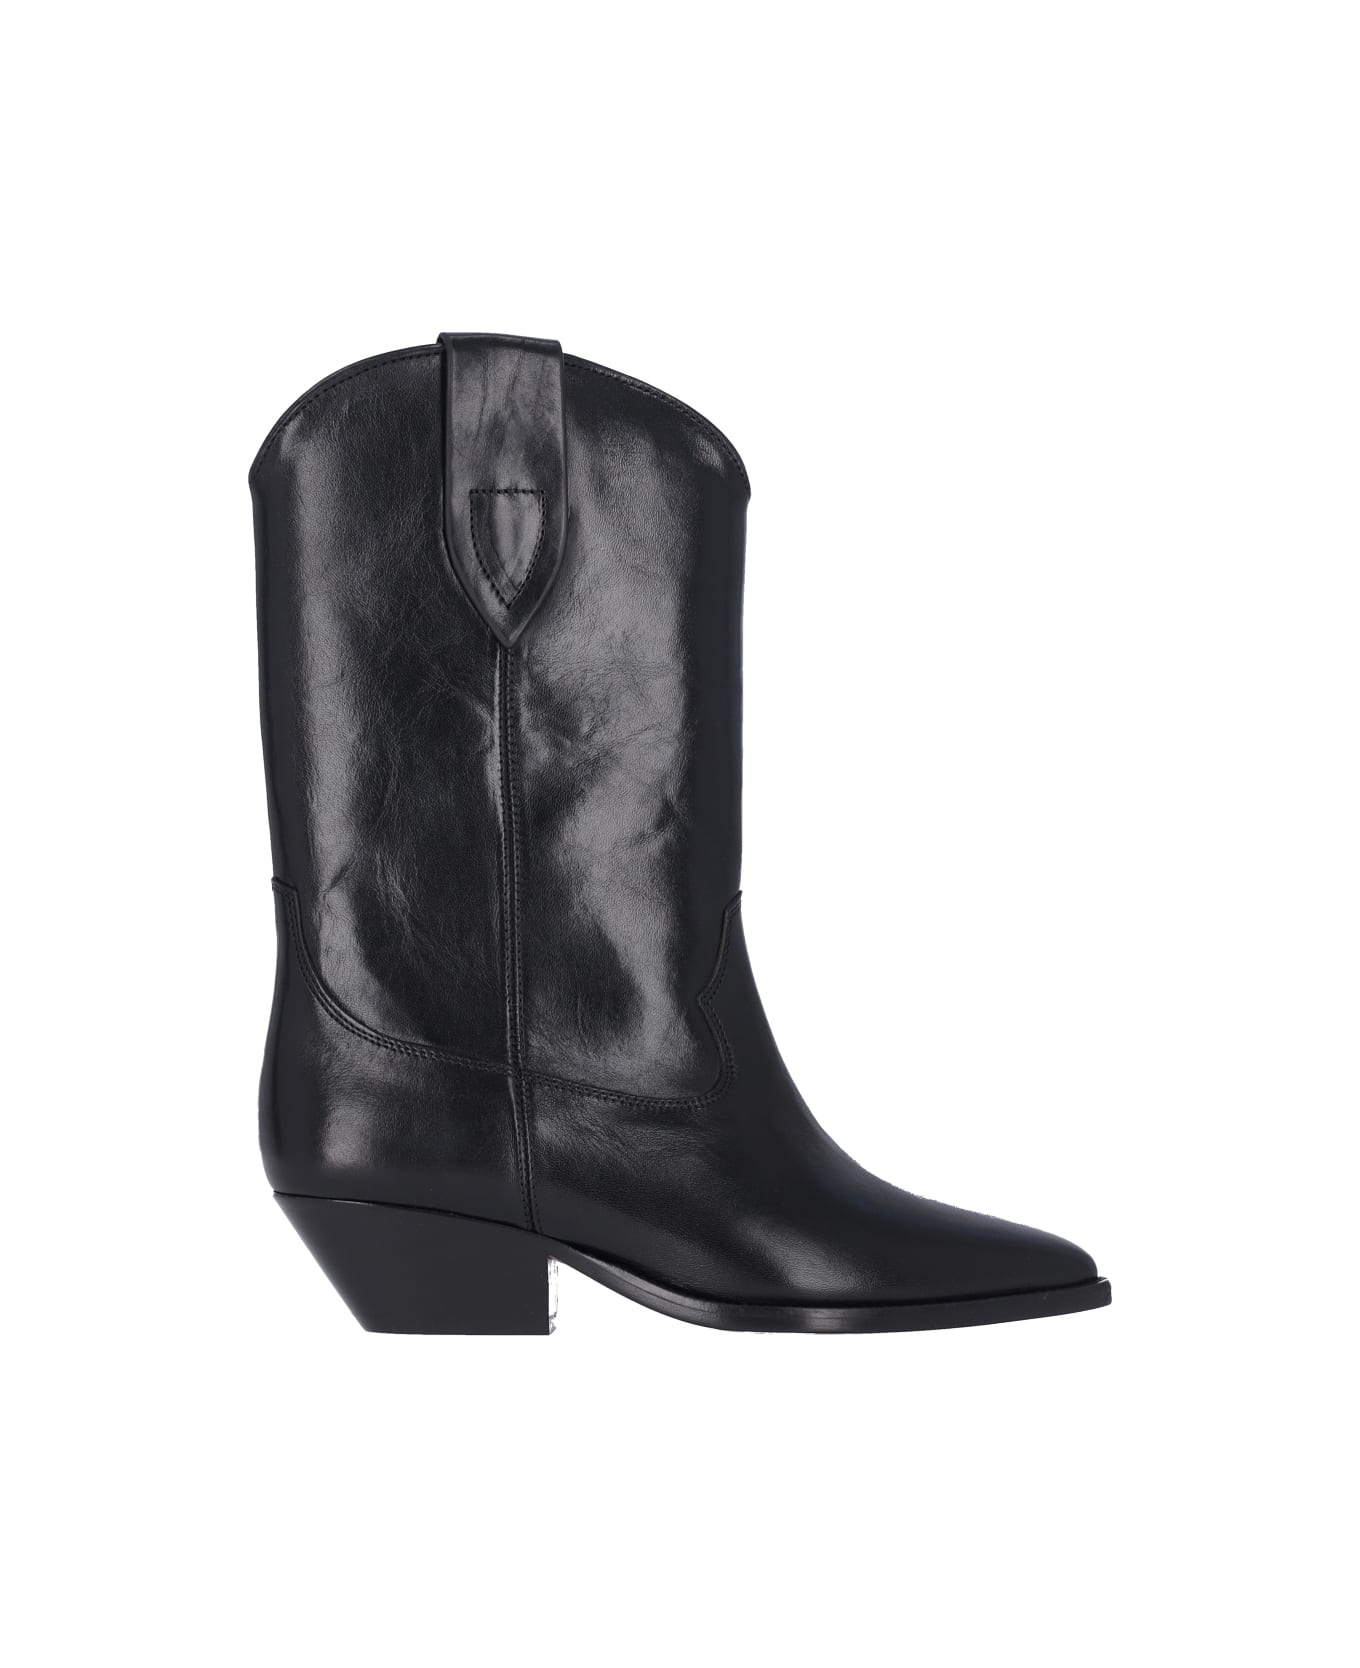 Isabel Marant Pointed Toe Block Heeled Ankle Boots - Black ブーツ